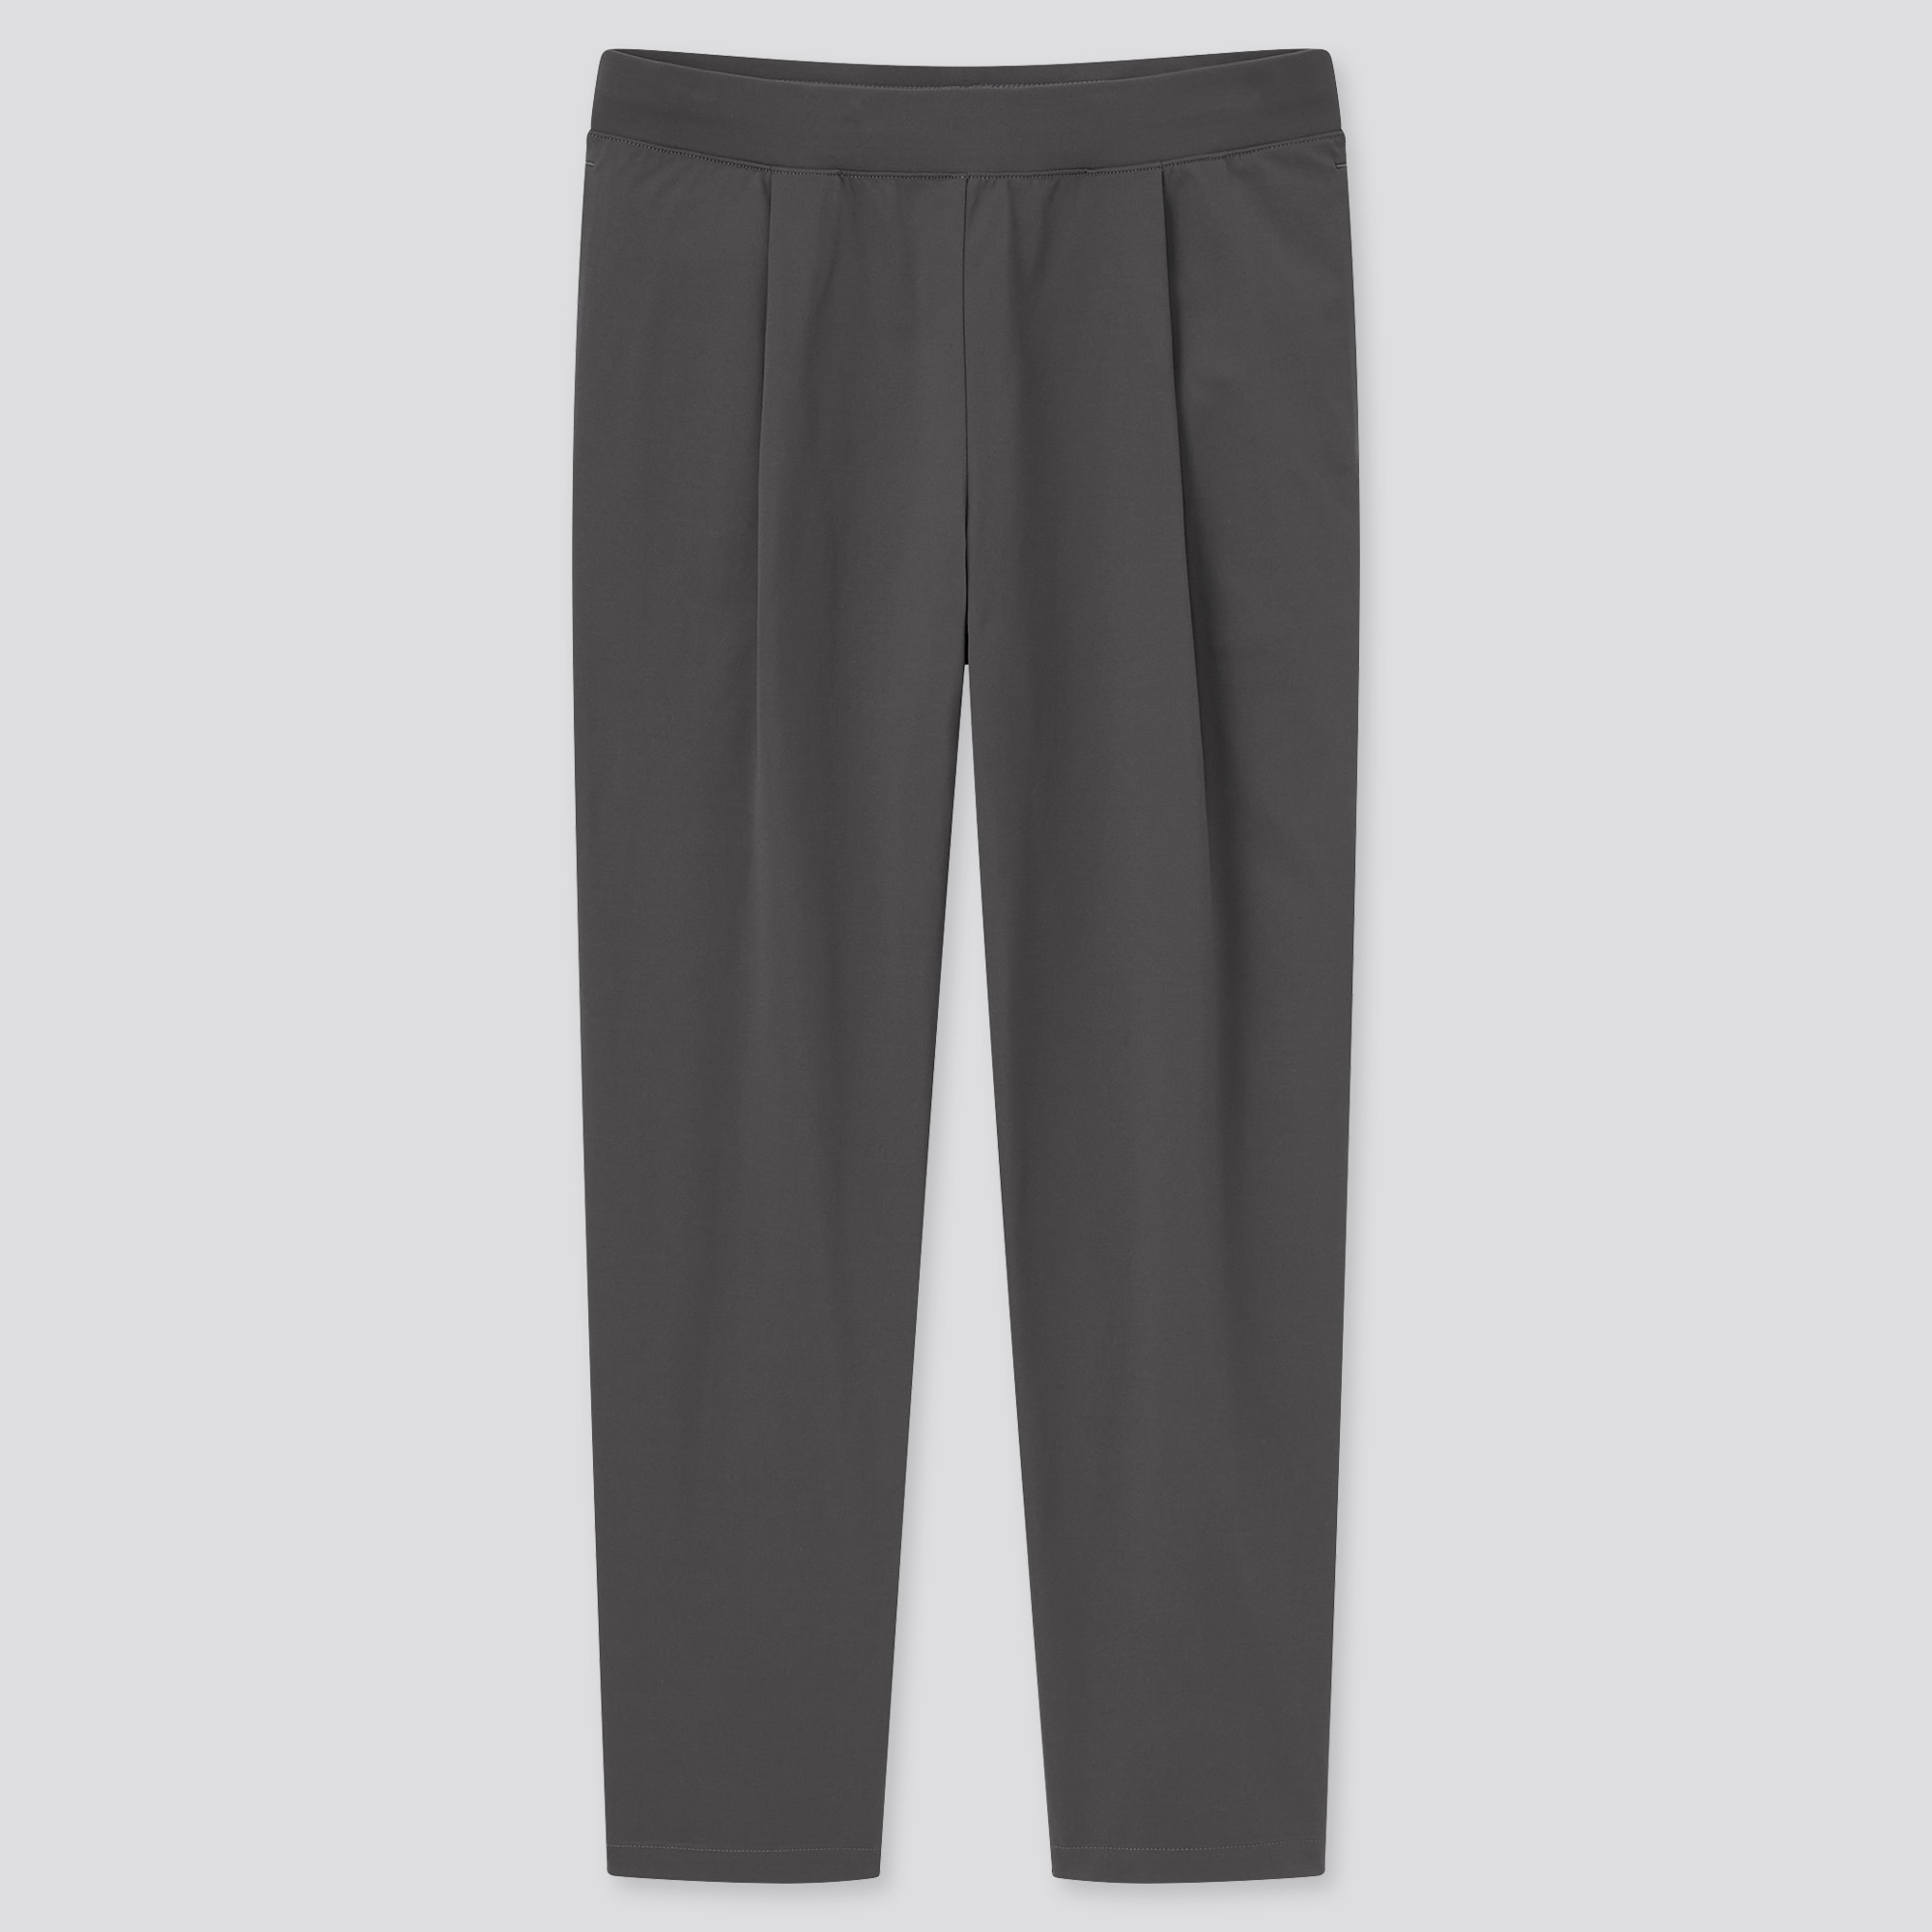 Buy Navy Blue Trousers & Pants for Men by Marks & Spencer Online | Ajio.com